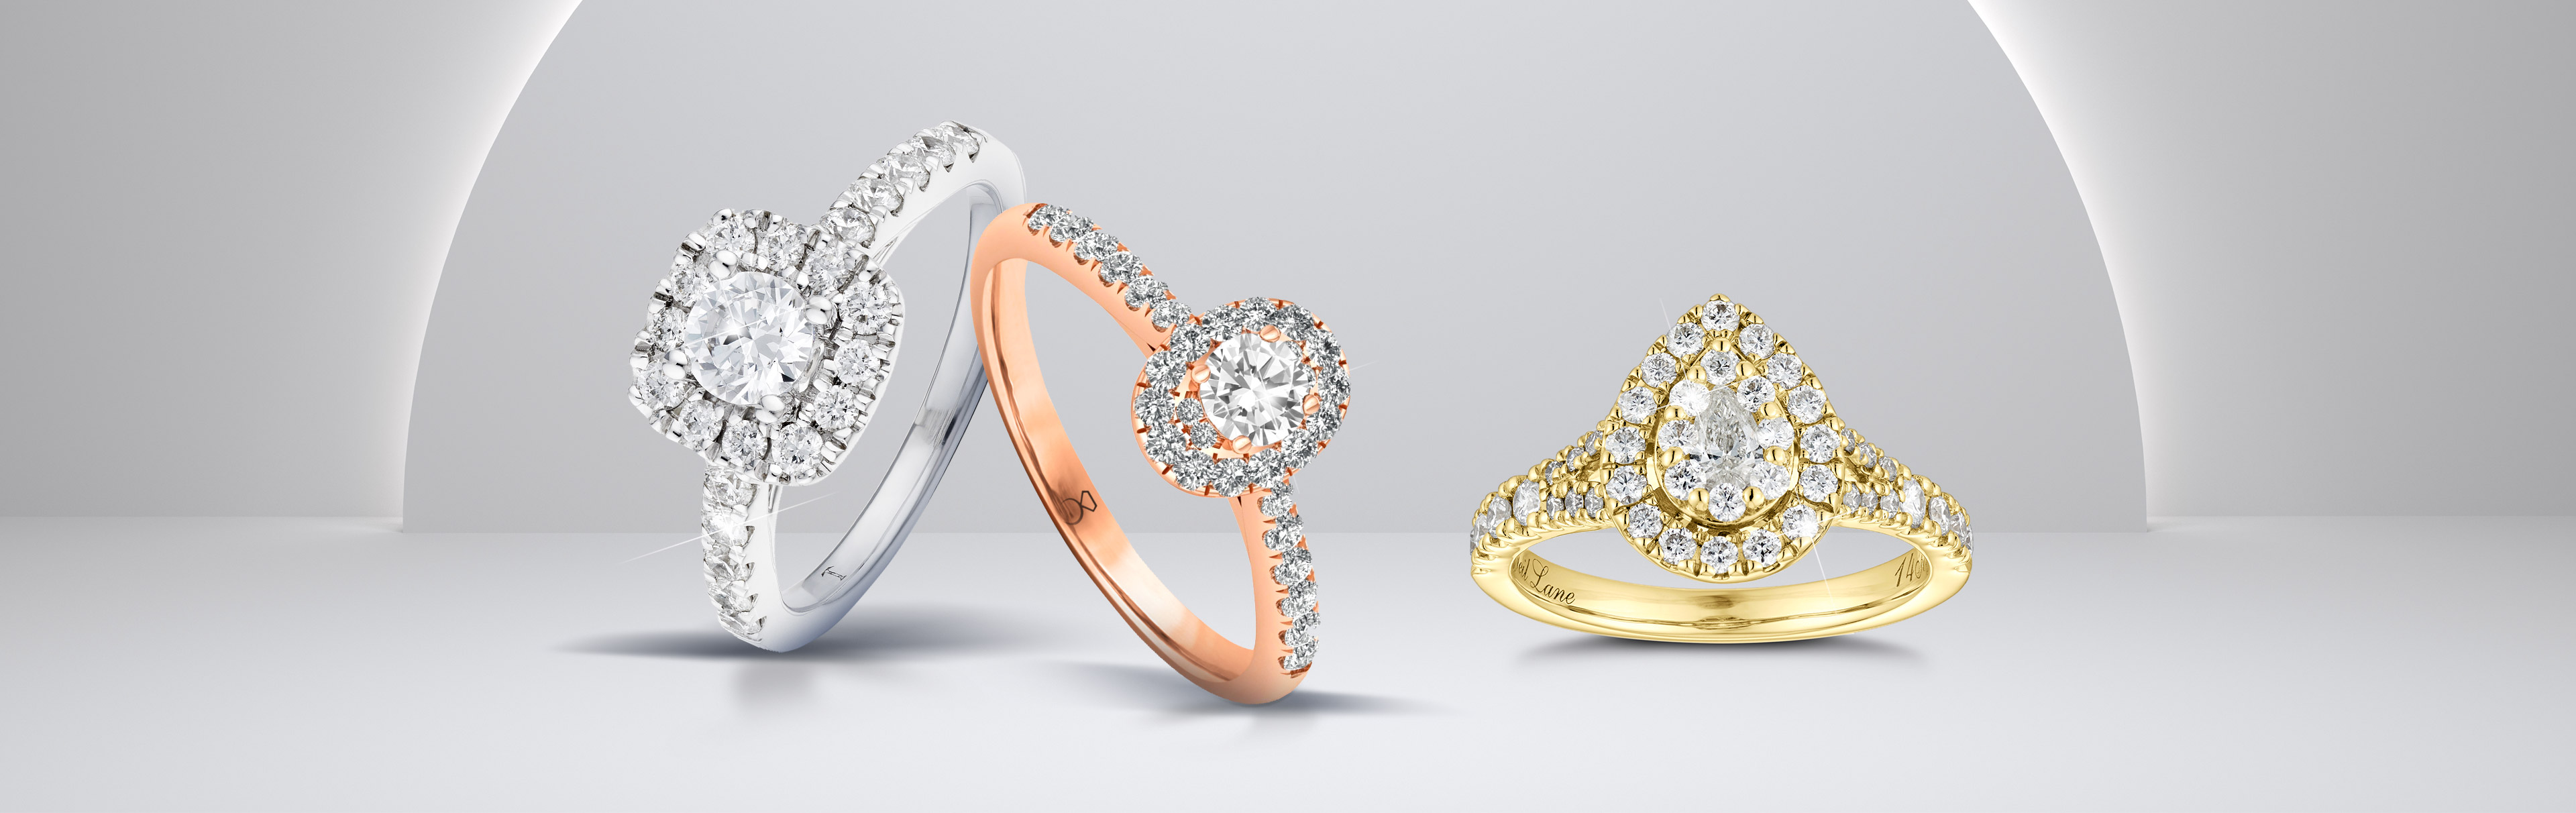 In What Order Do You Wear Your Wedding Rings? | Shreve & Co. Jewelers